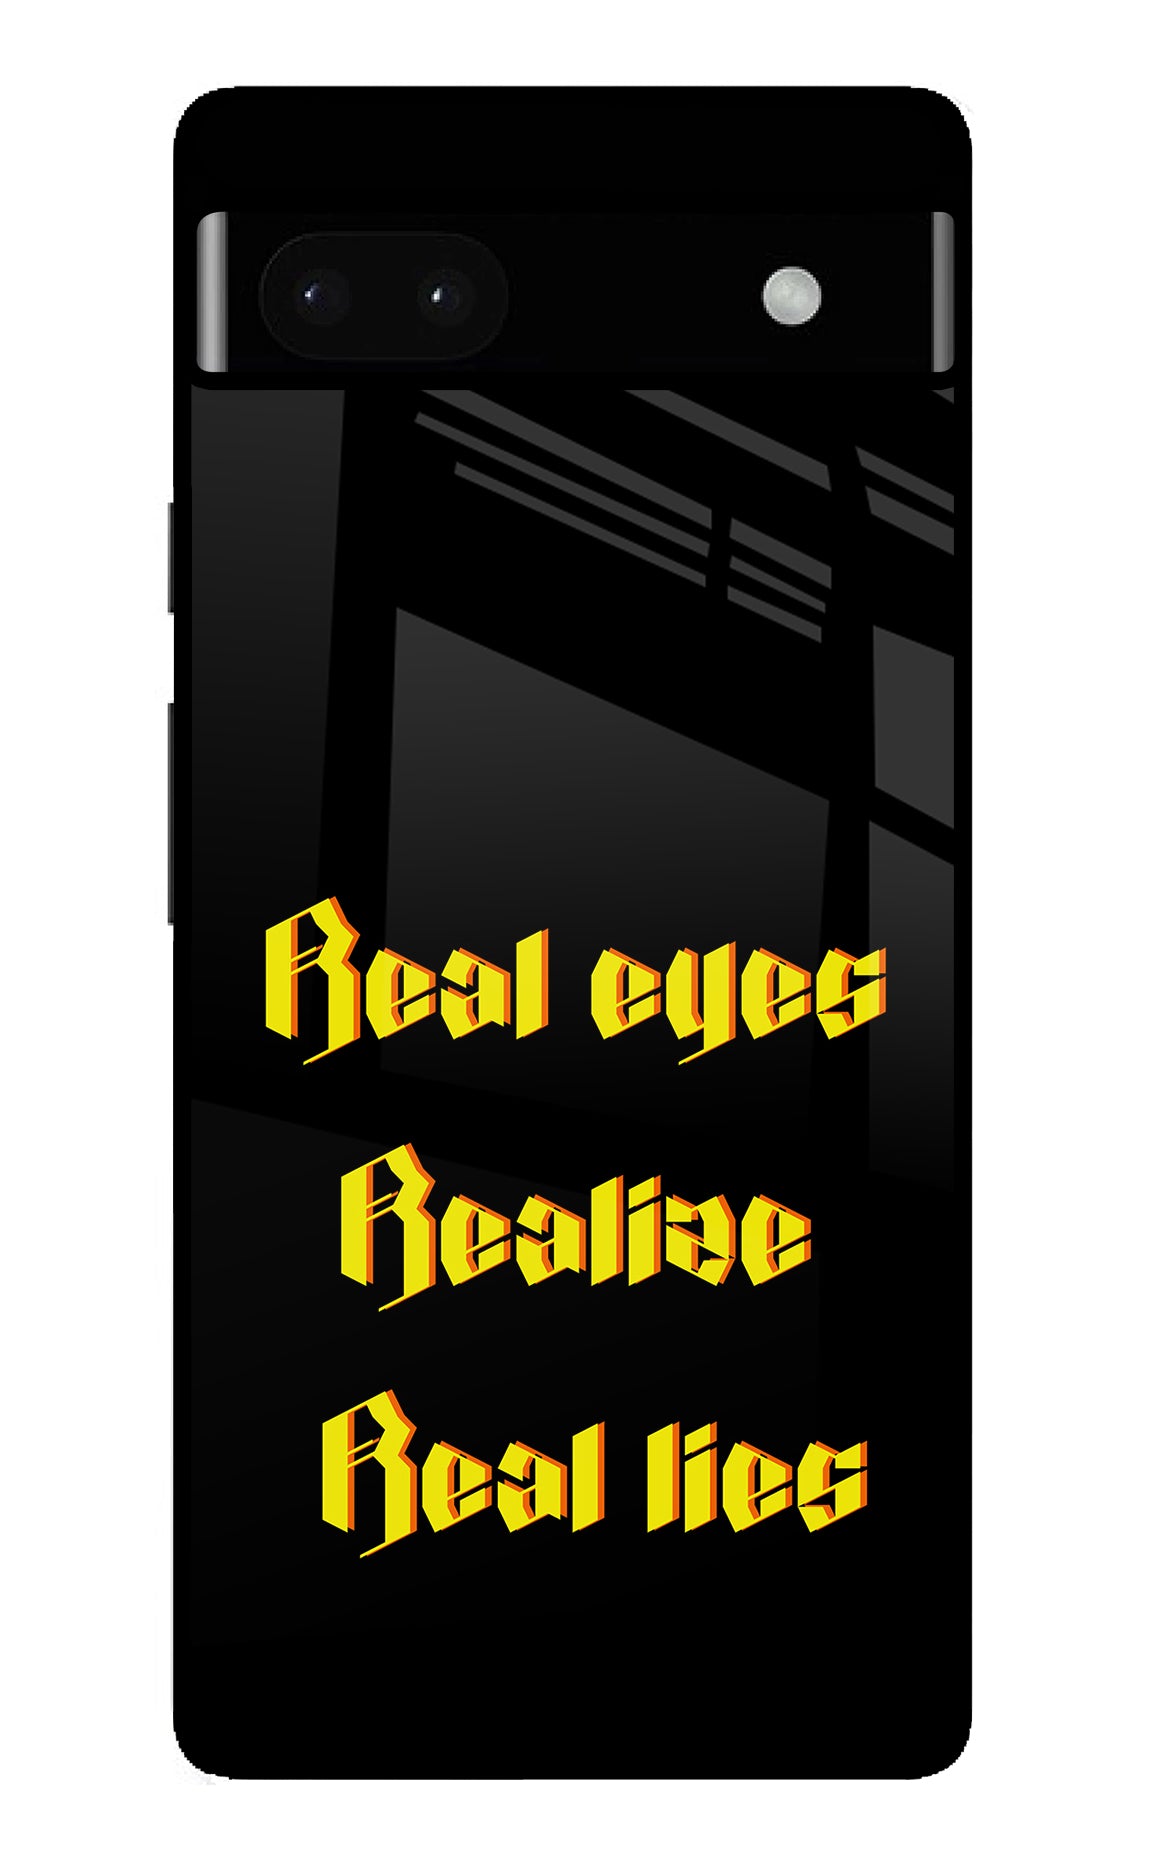 Real Eyes Realize Real Lies Google Pixel 6A Back Cover